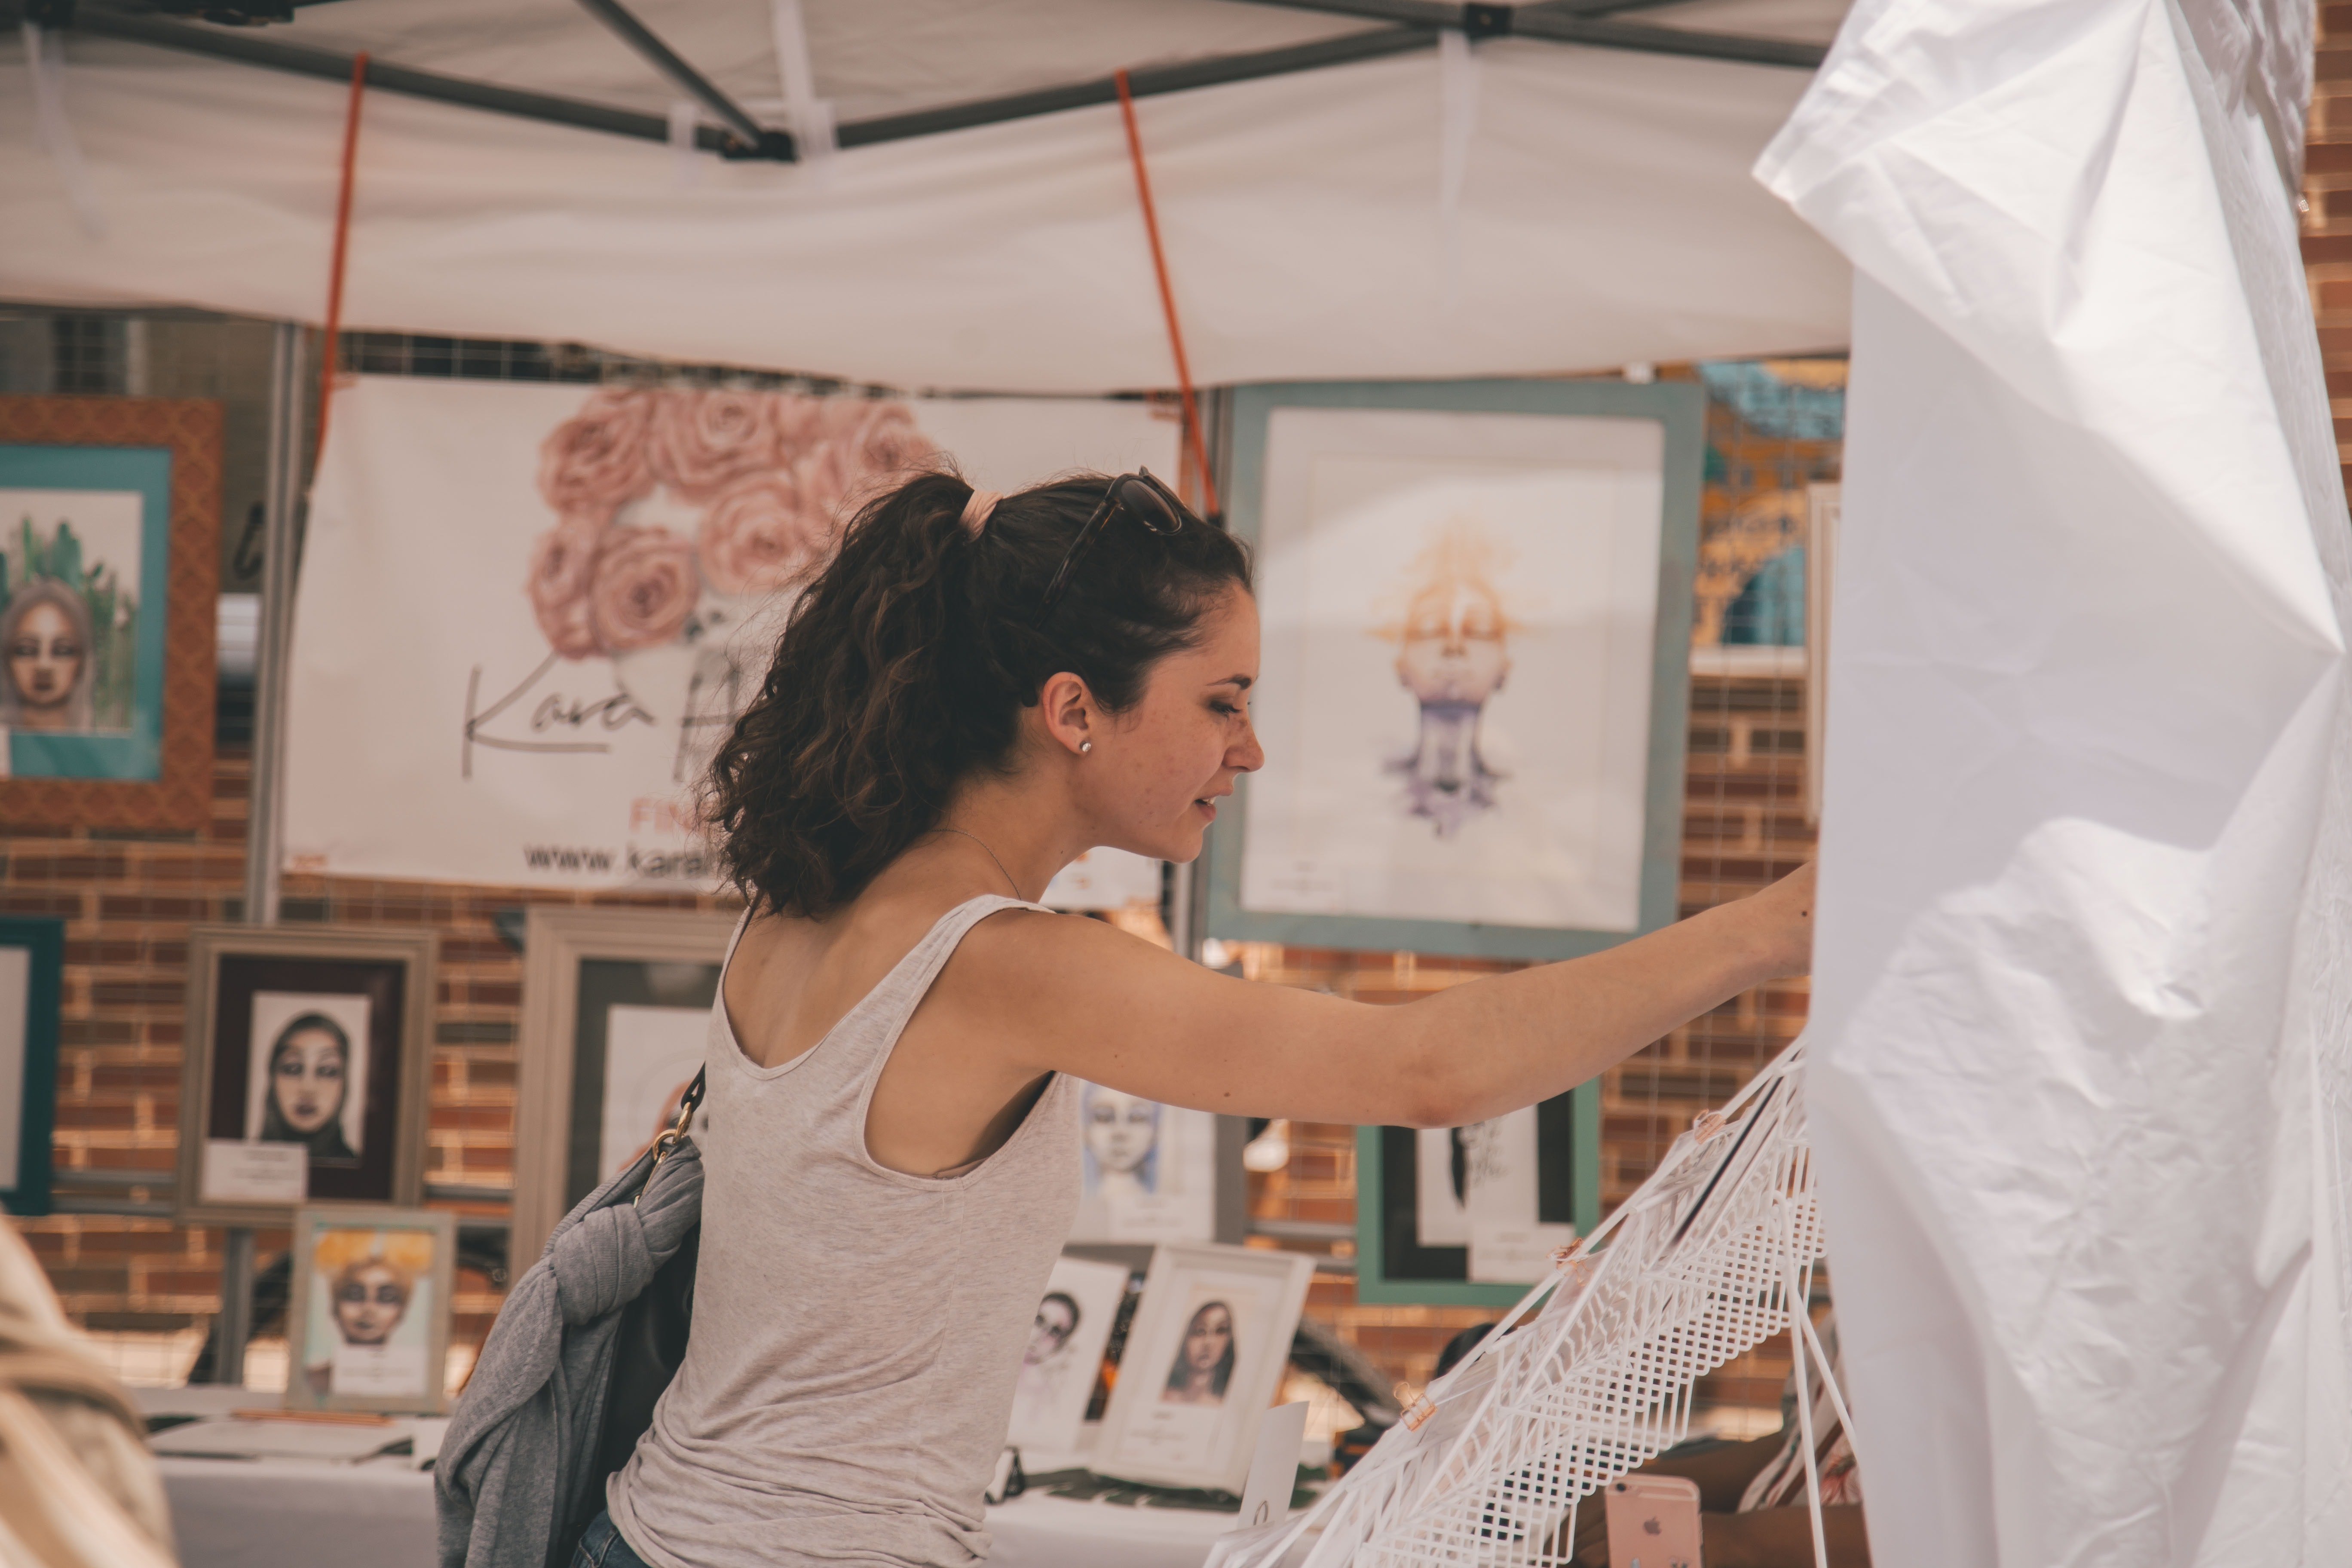 Bob put up a small stall on the street to sell his artwork. | Source: Pexels